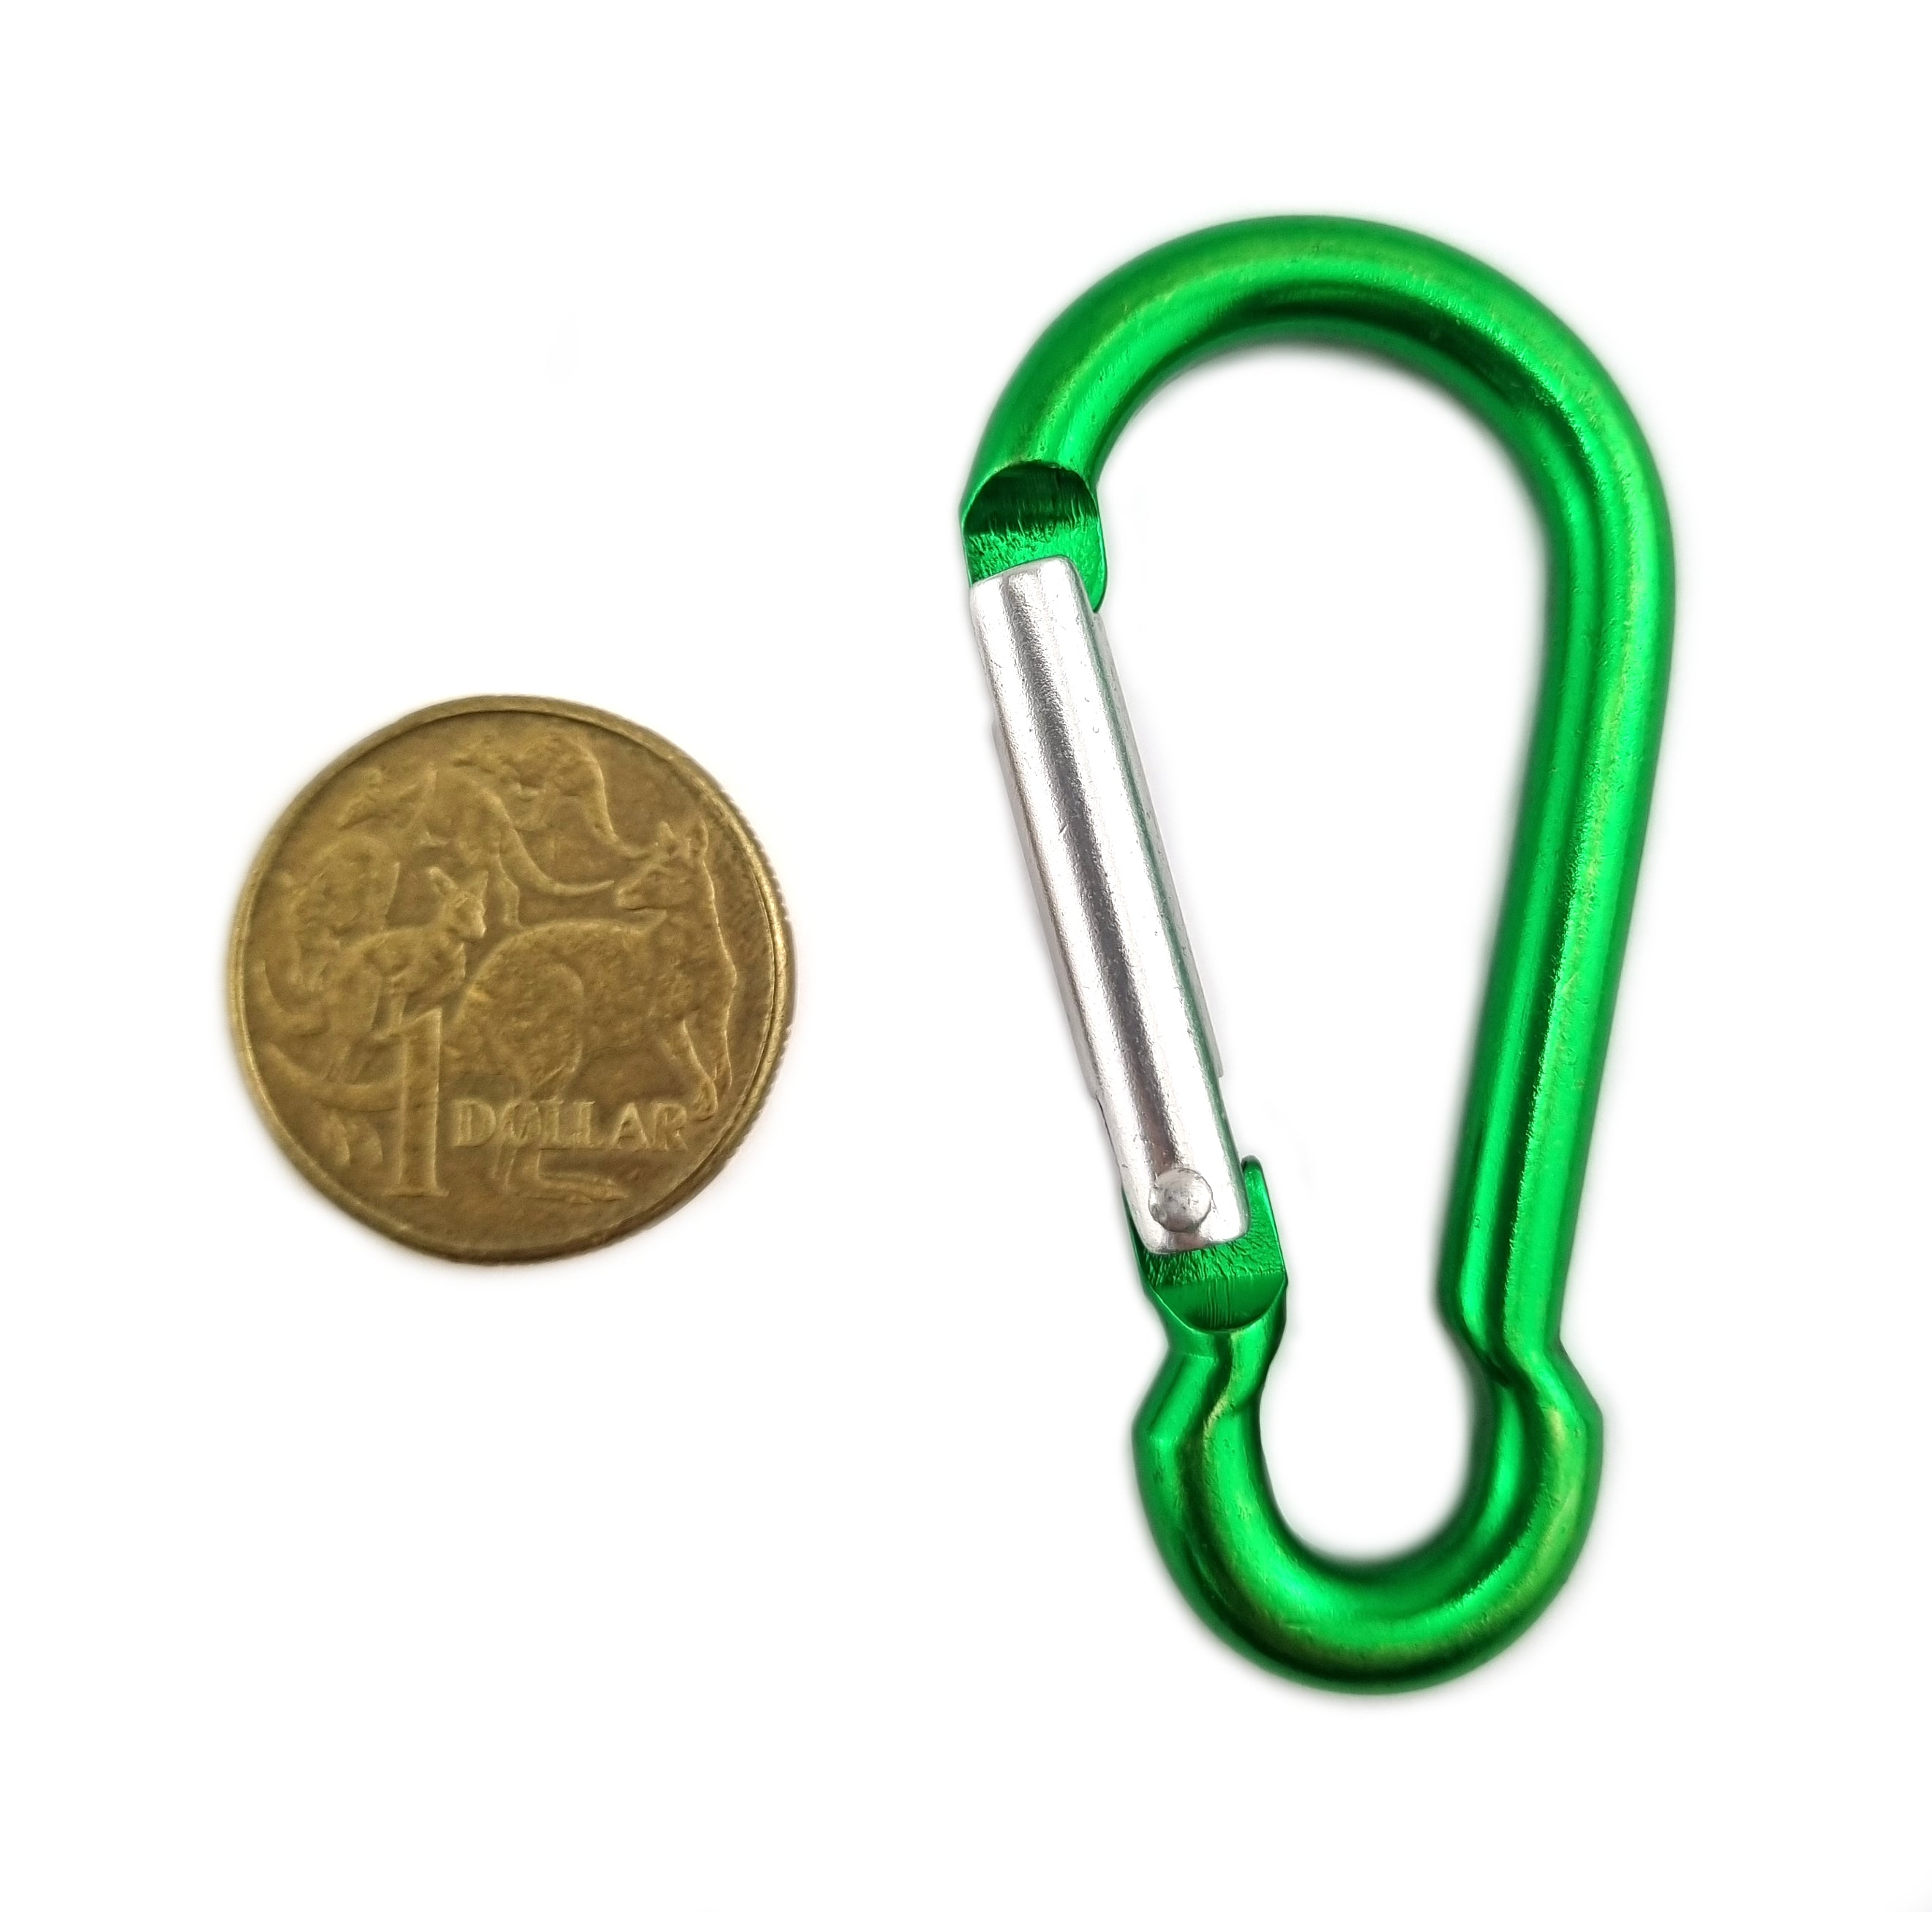 Aluminium snap hook carabiner in green, size 6mm, untested. Shop hardware online chain.com.au